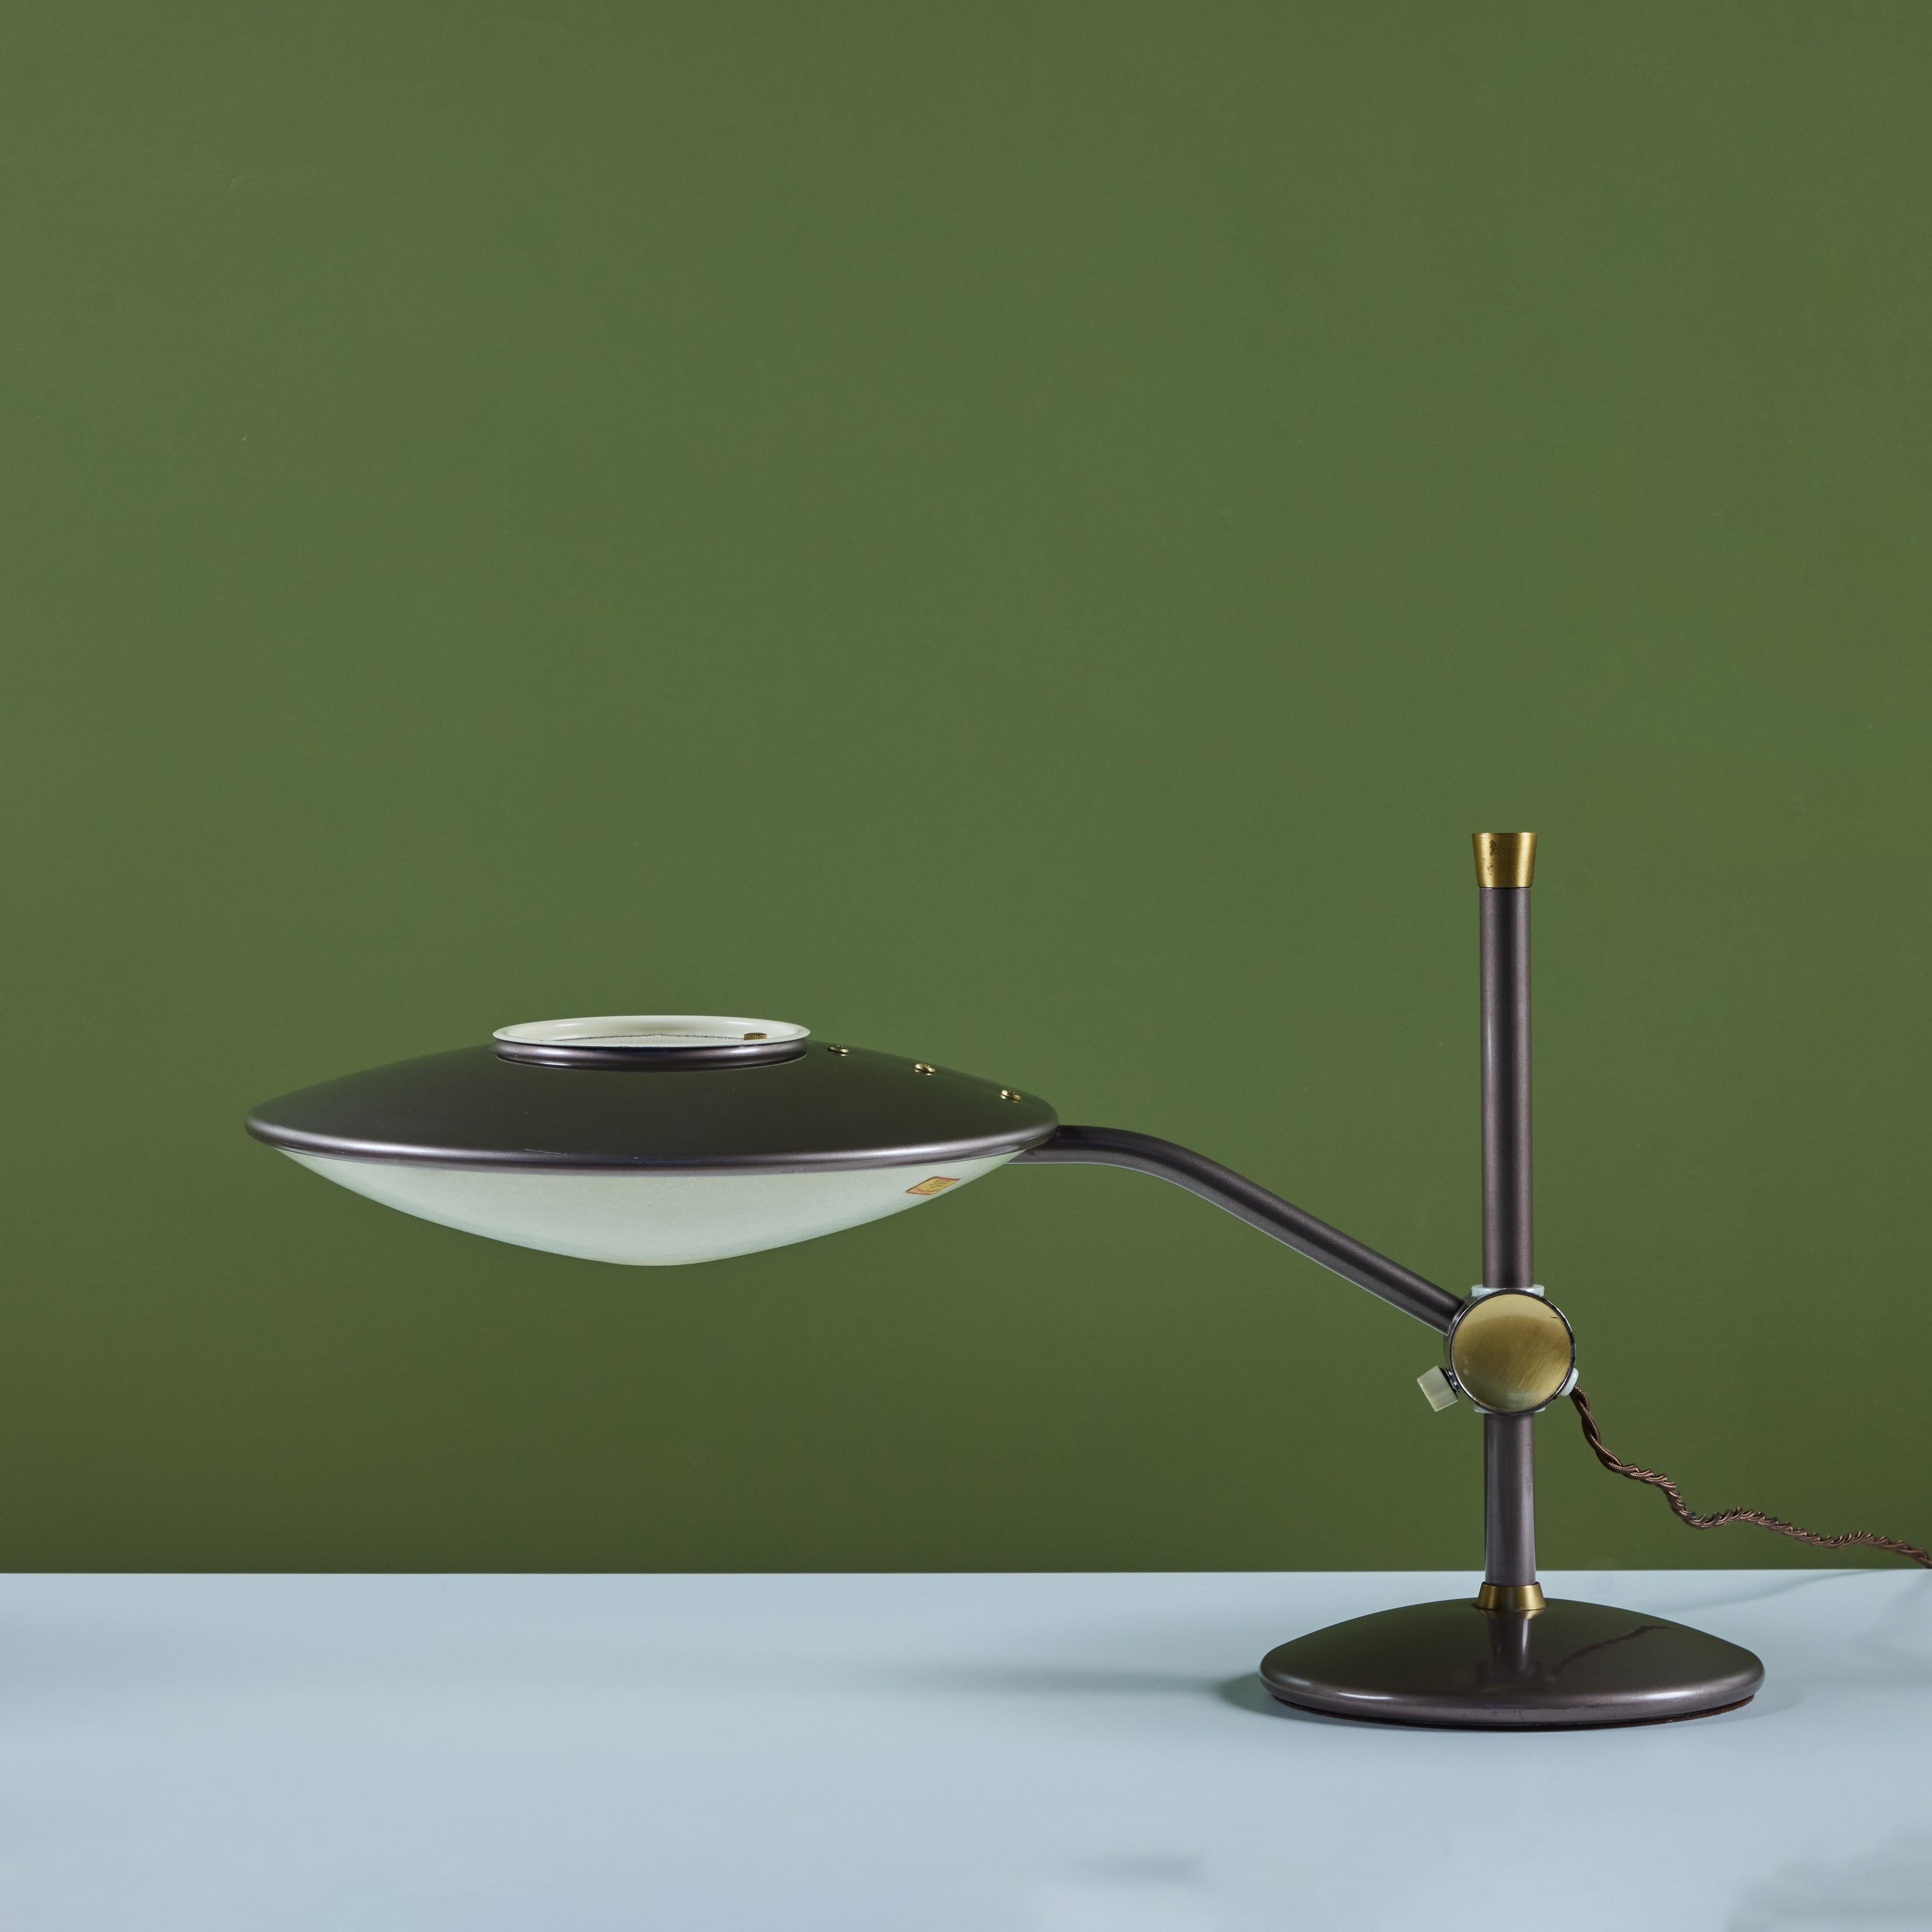 Enameled Dazor Taupe Enamel Desk Lamp with Brass Accents